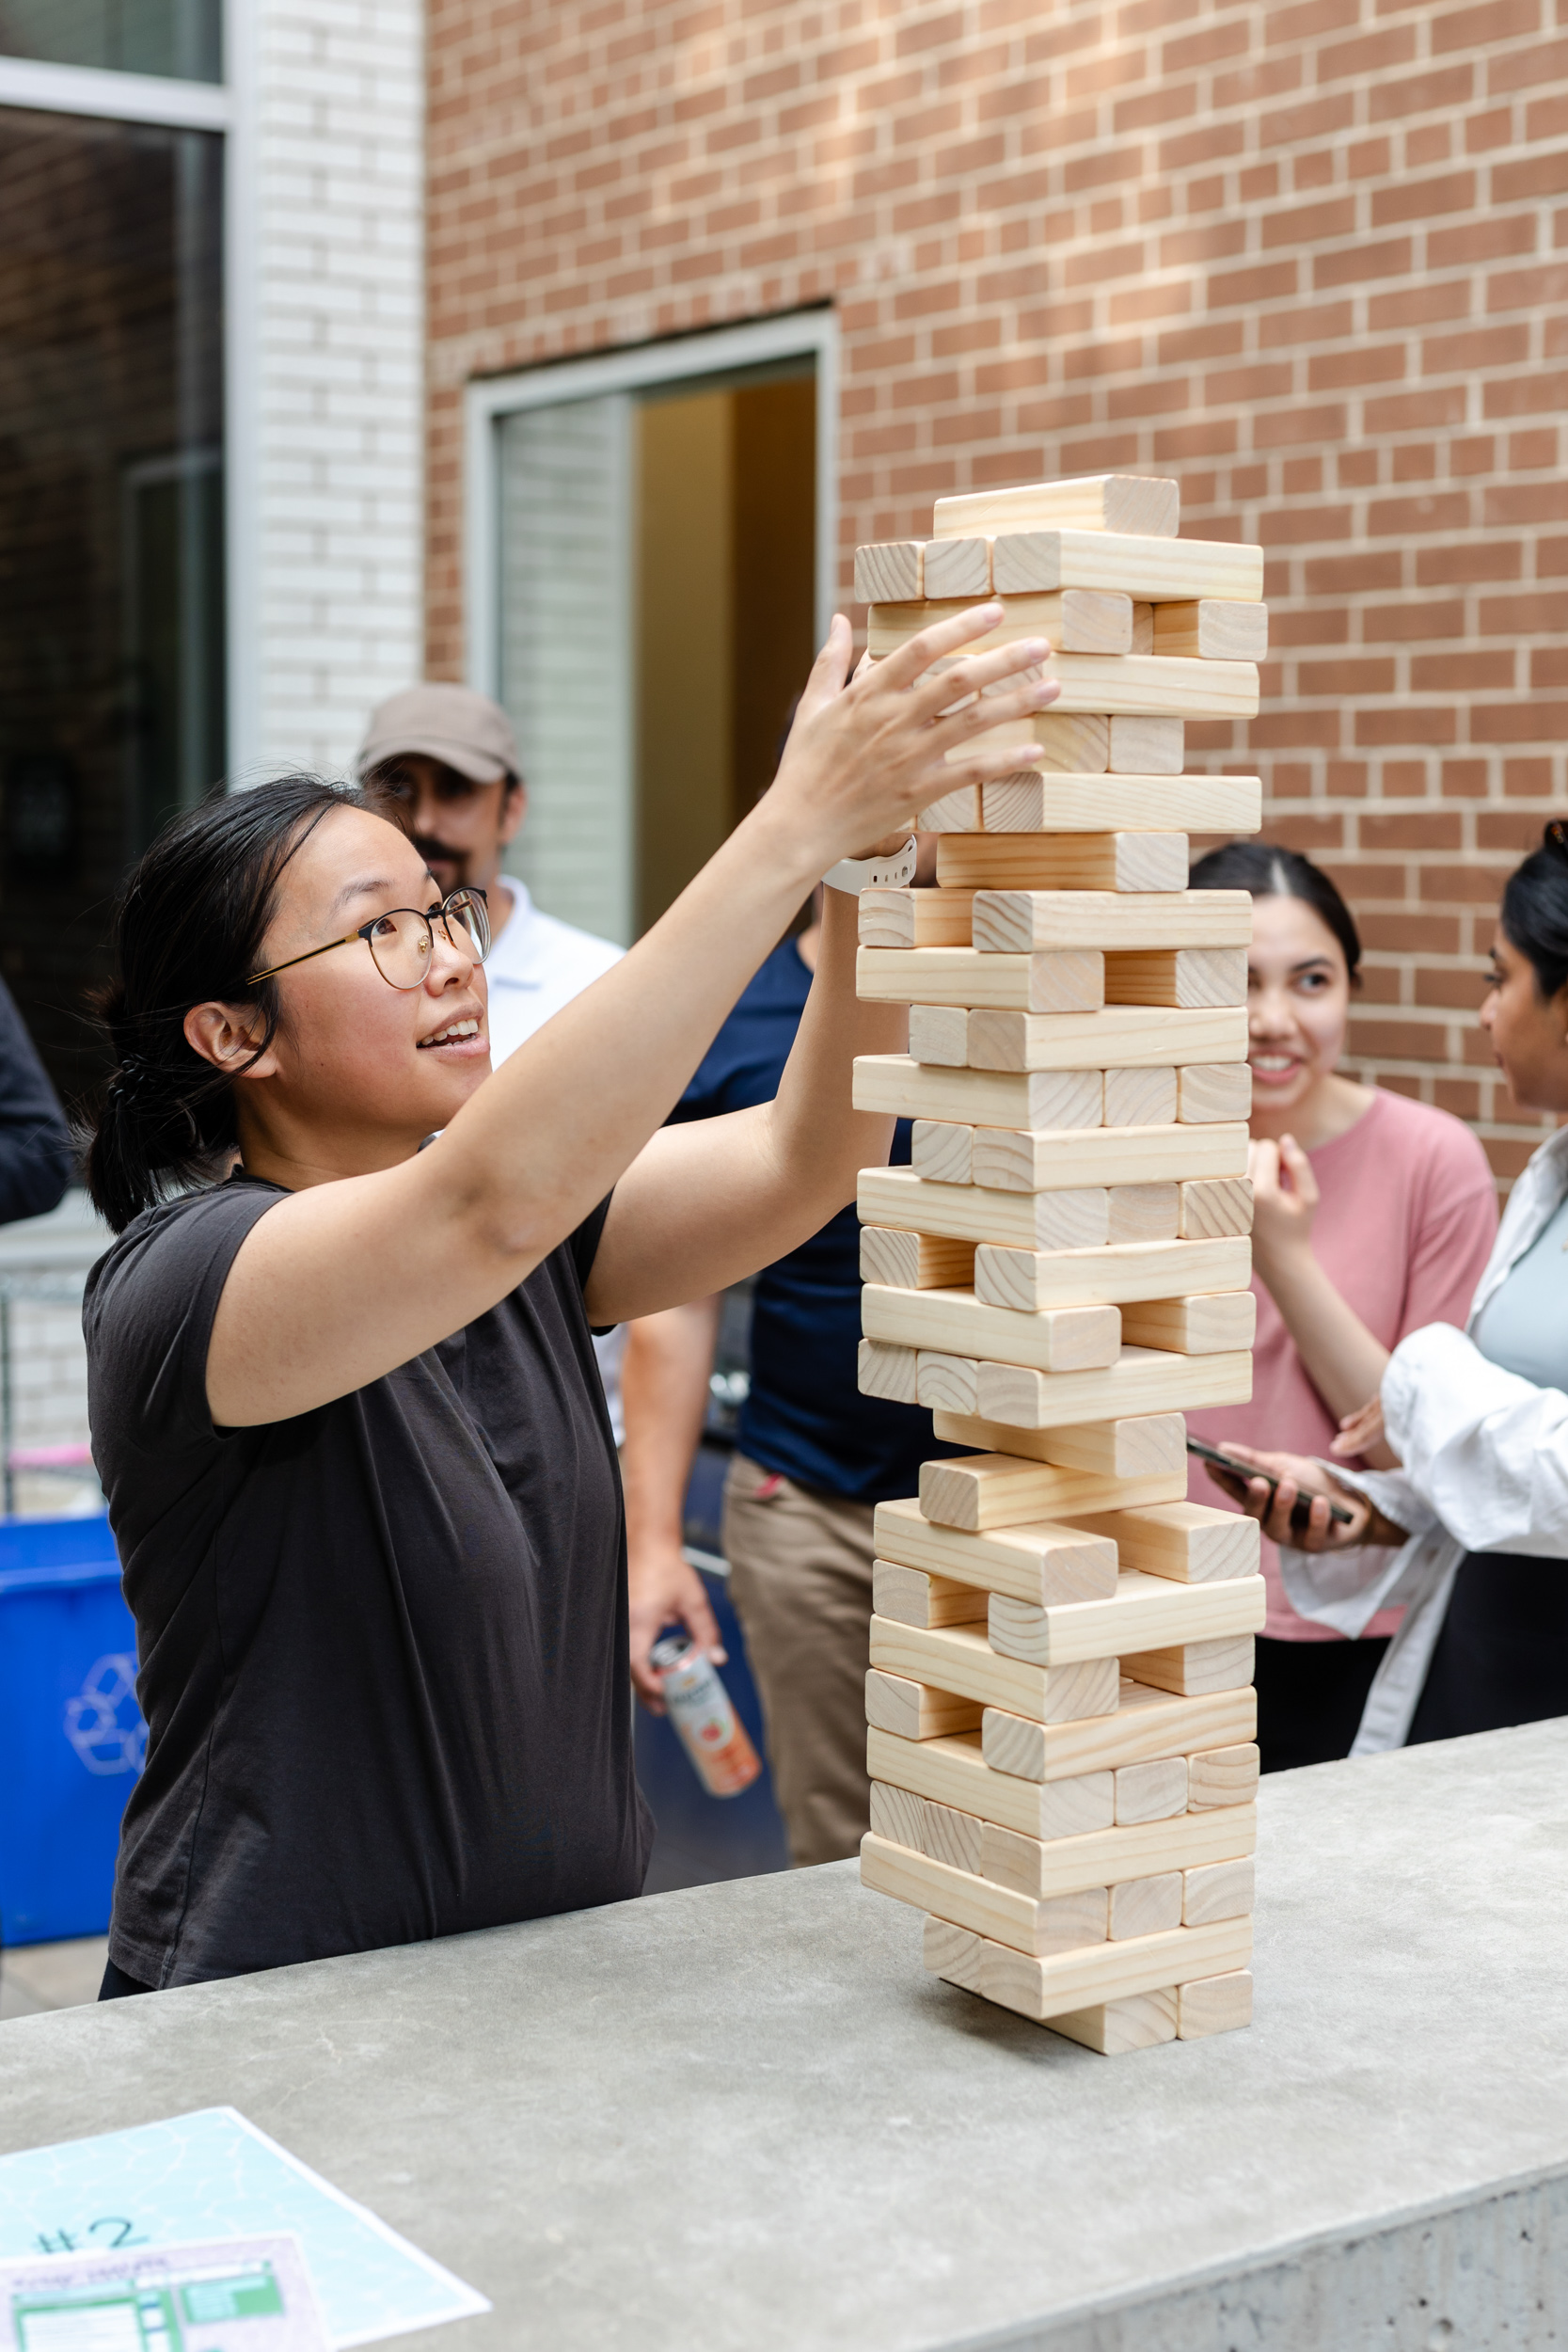 Social Event: A group of people playing a game of Jenga, captured in photography.